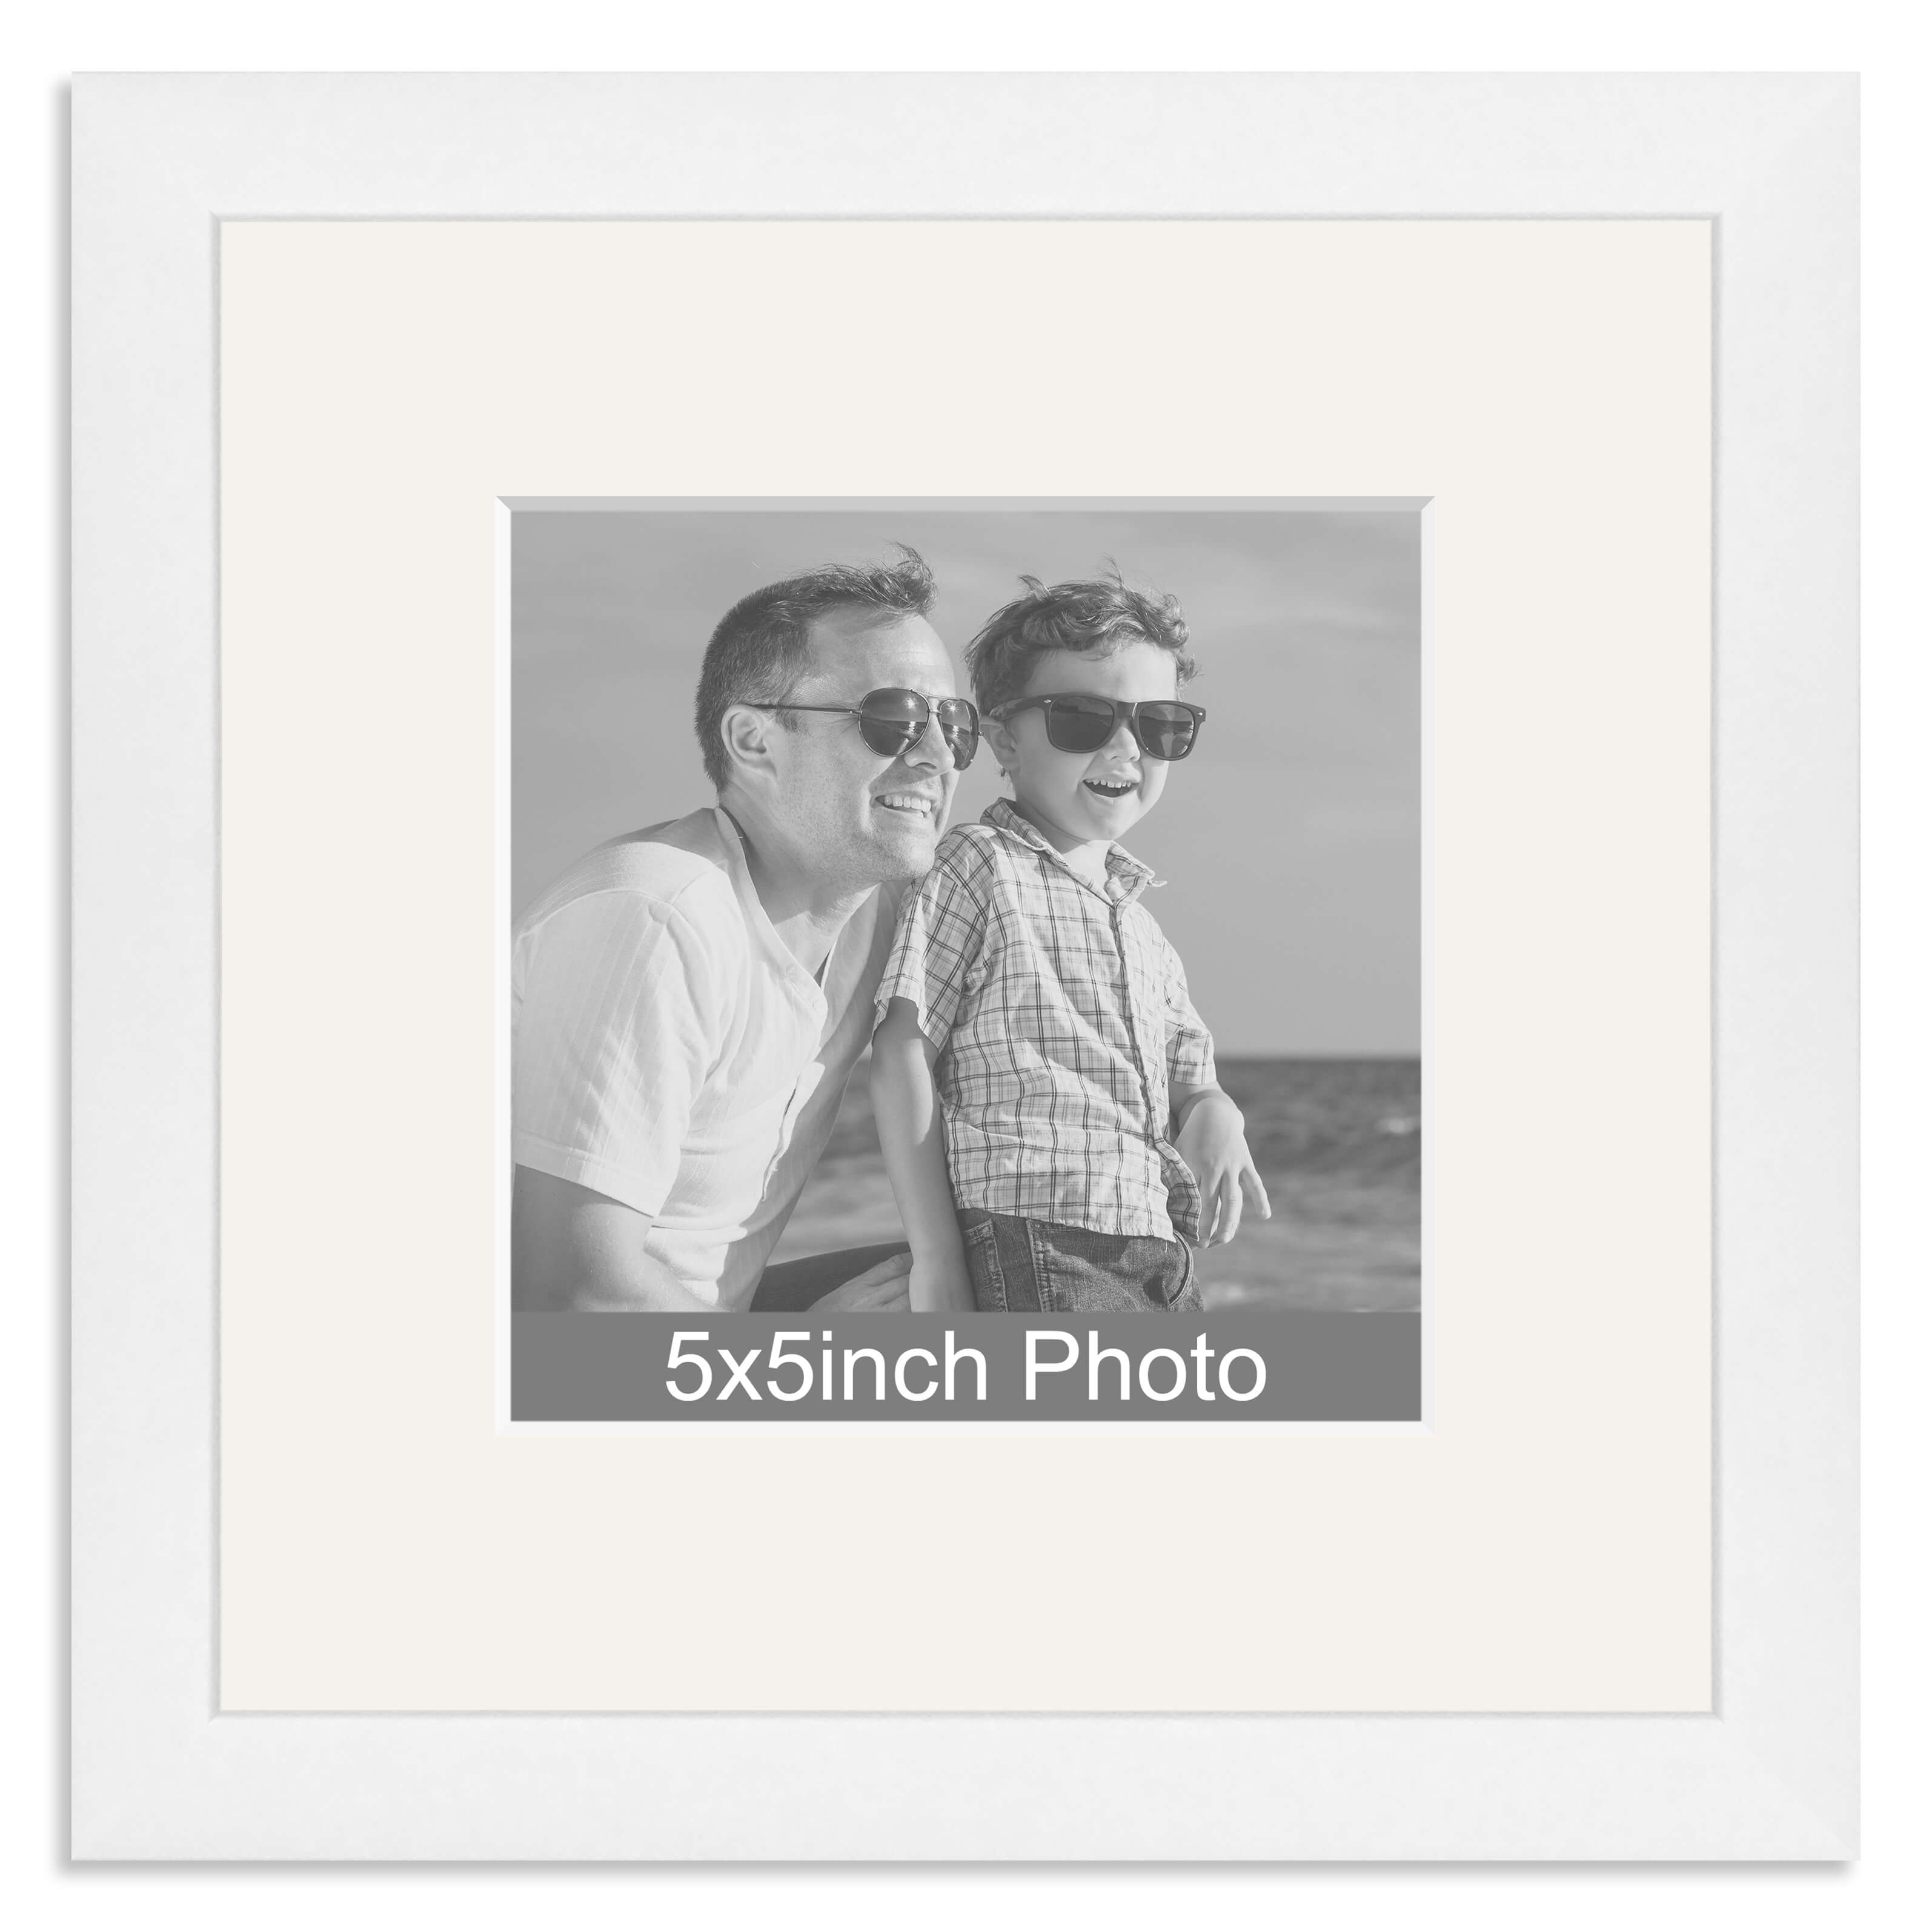 White Wooden Photo Frame with mount for a 5x5in Photo – Photo to follow by email